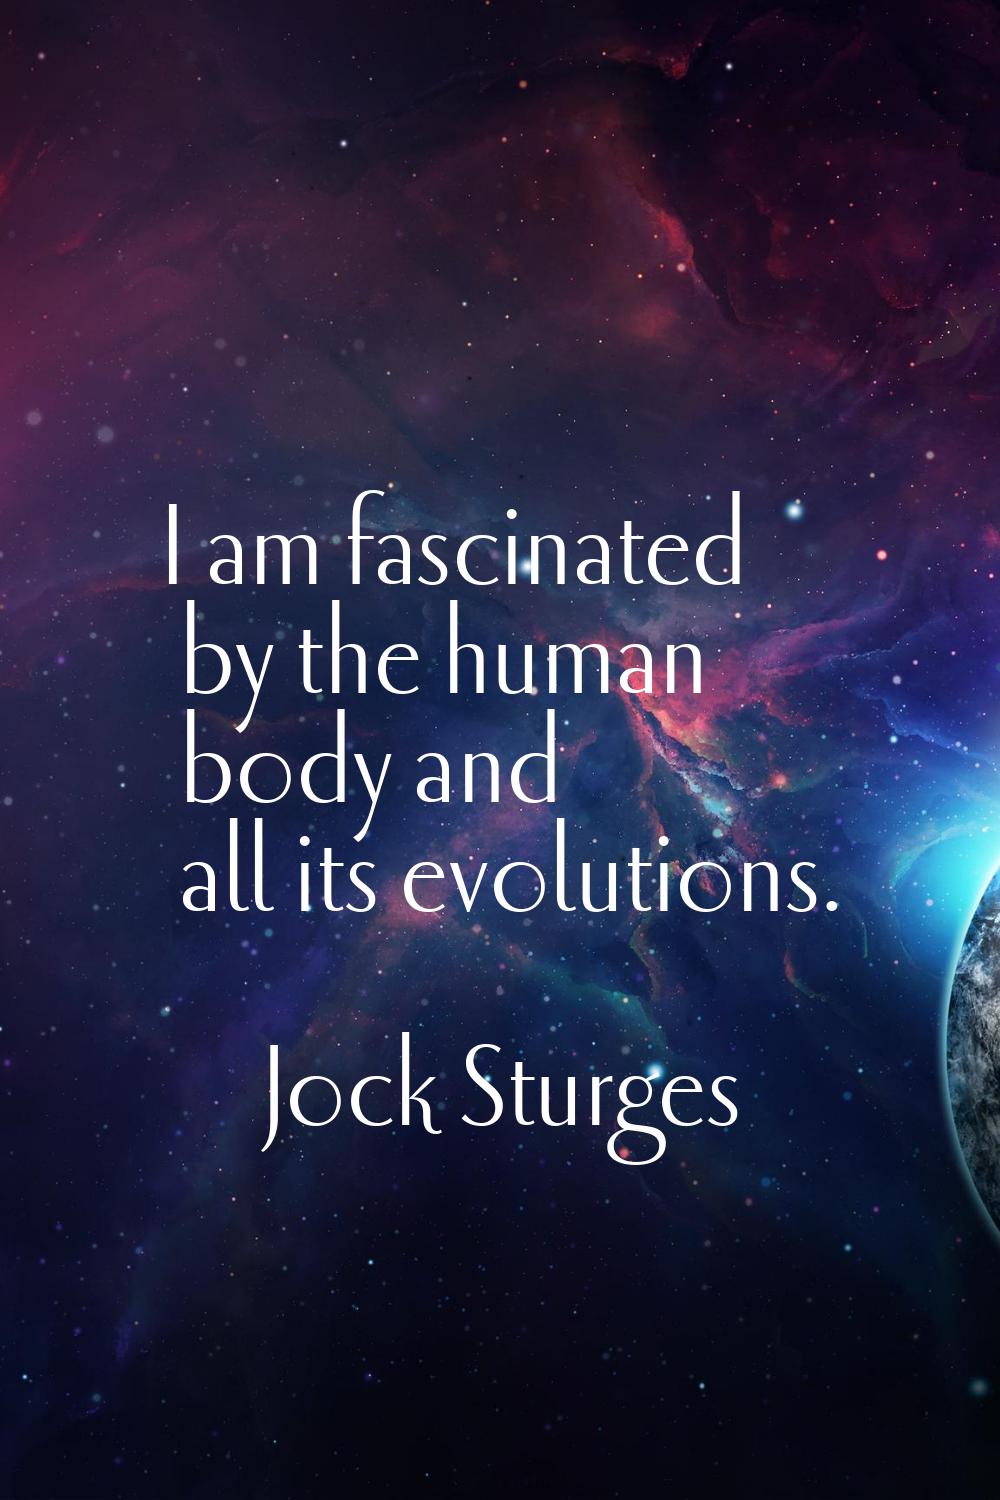 I am fascinated by the human body and all its evolutions.